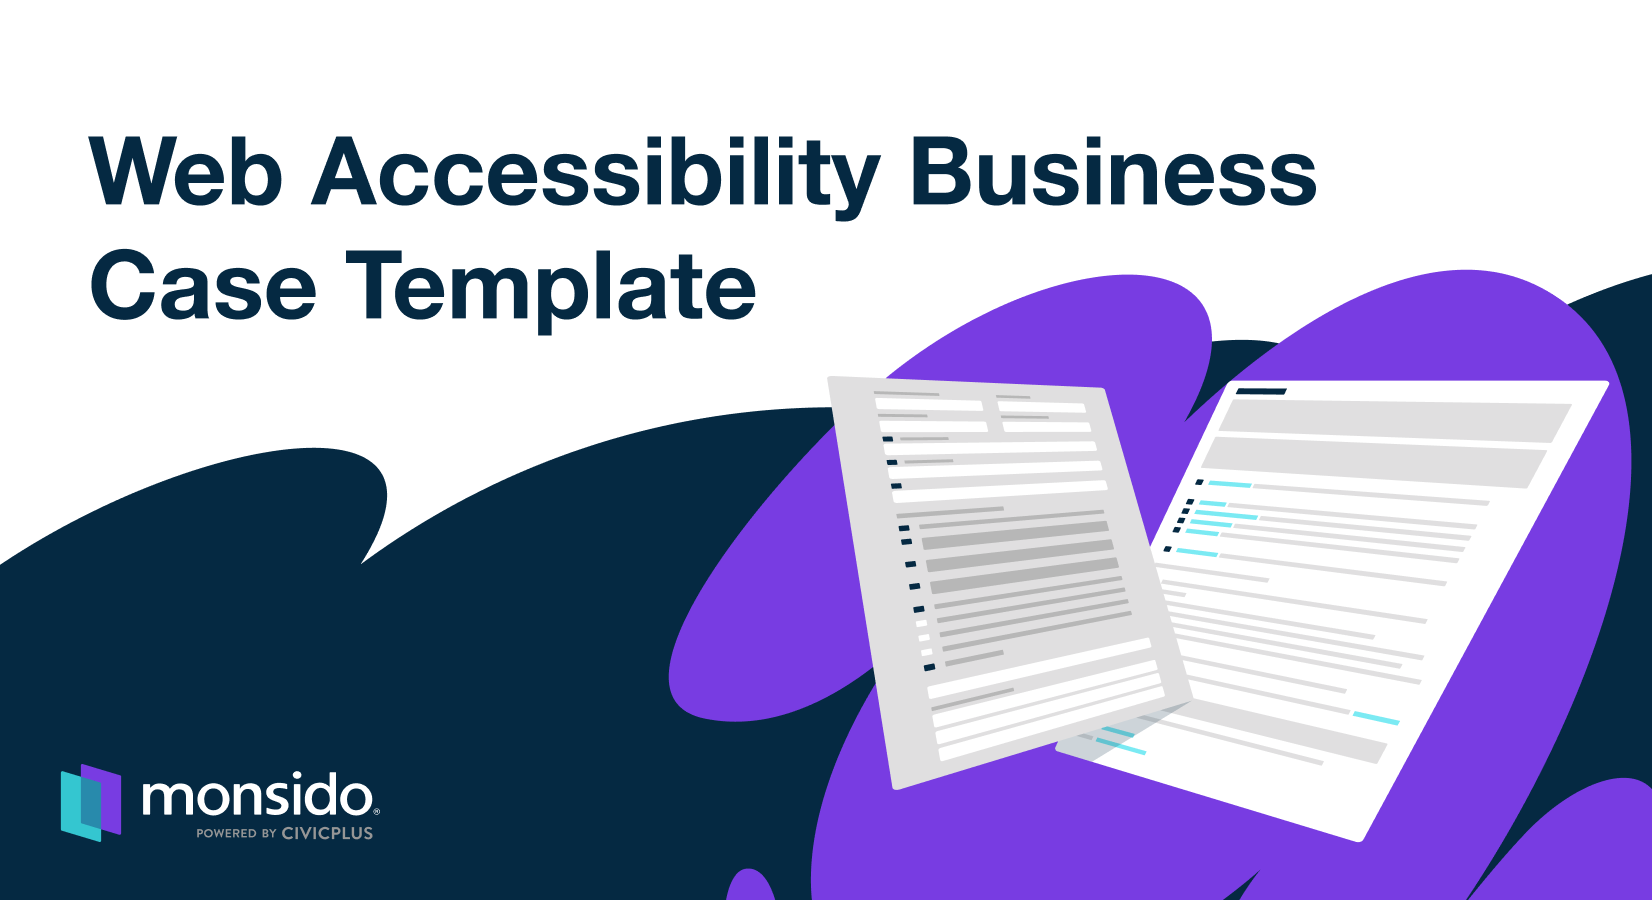 Illustration of a web accessibility business case template. Text overlaid: Web Accessibility Business Case Template